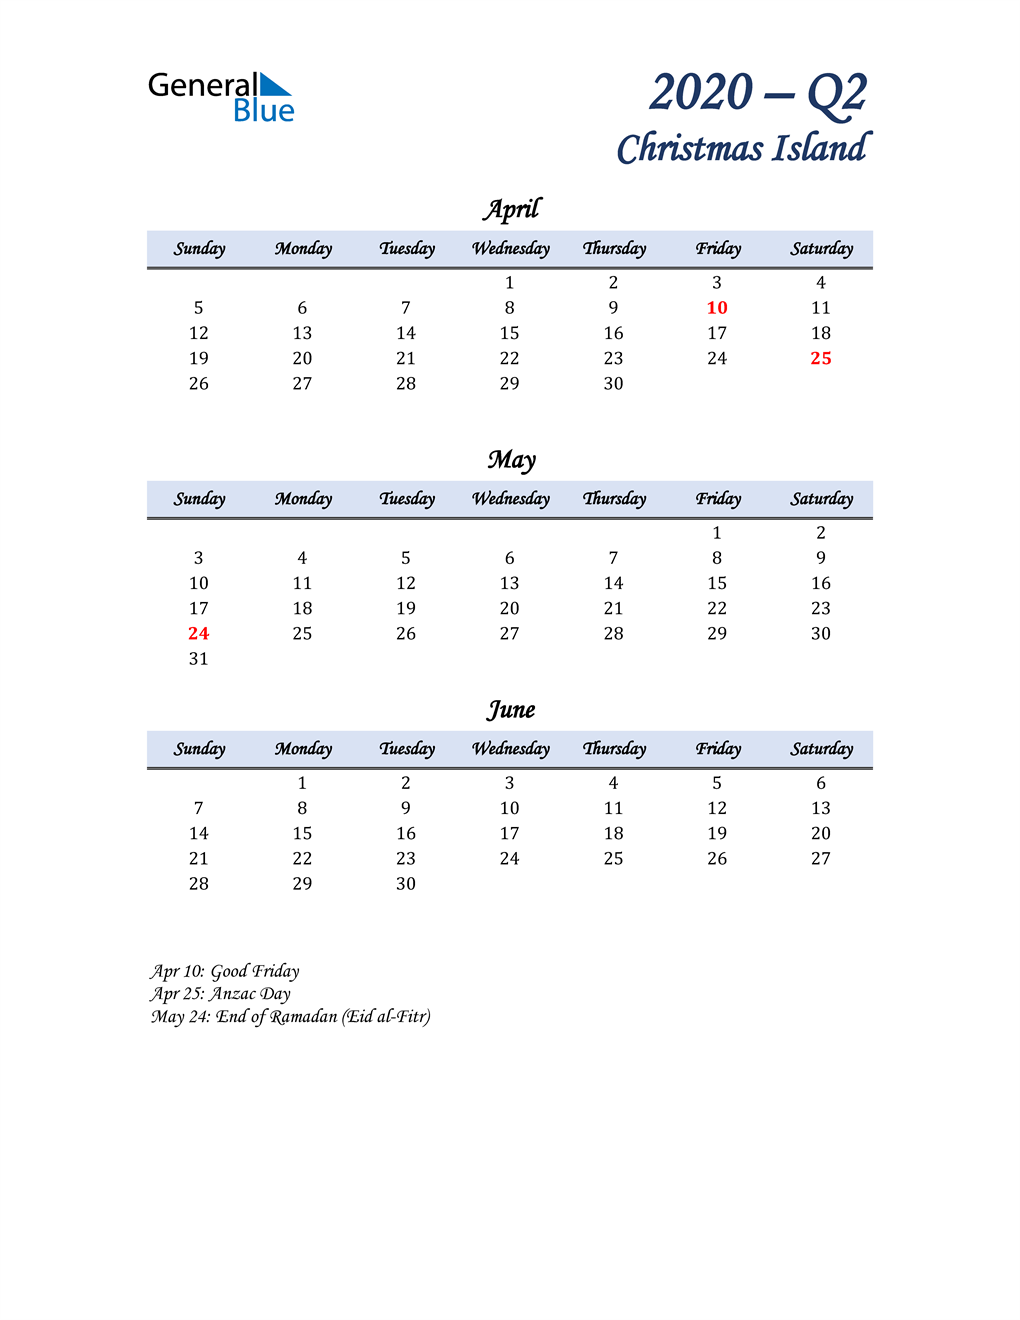  April, May, and June Calendar for Christmas Island